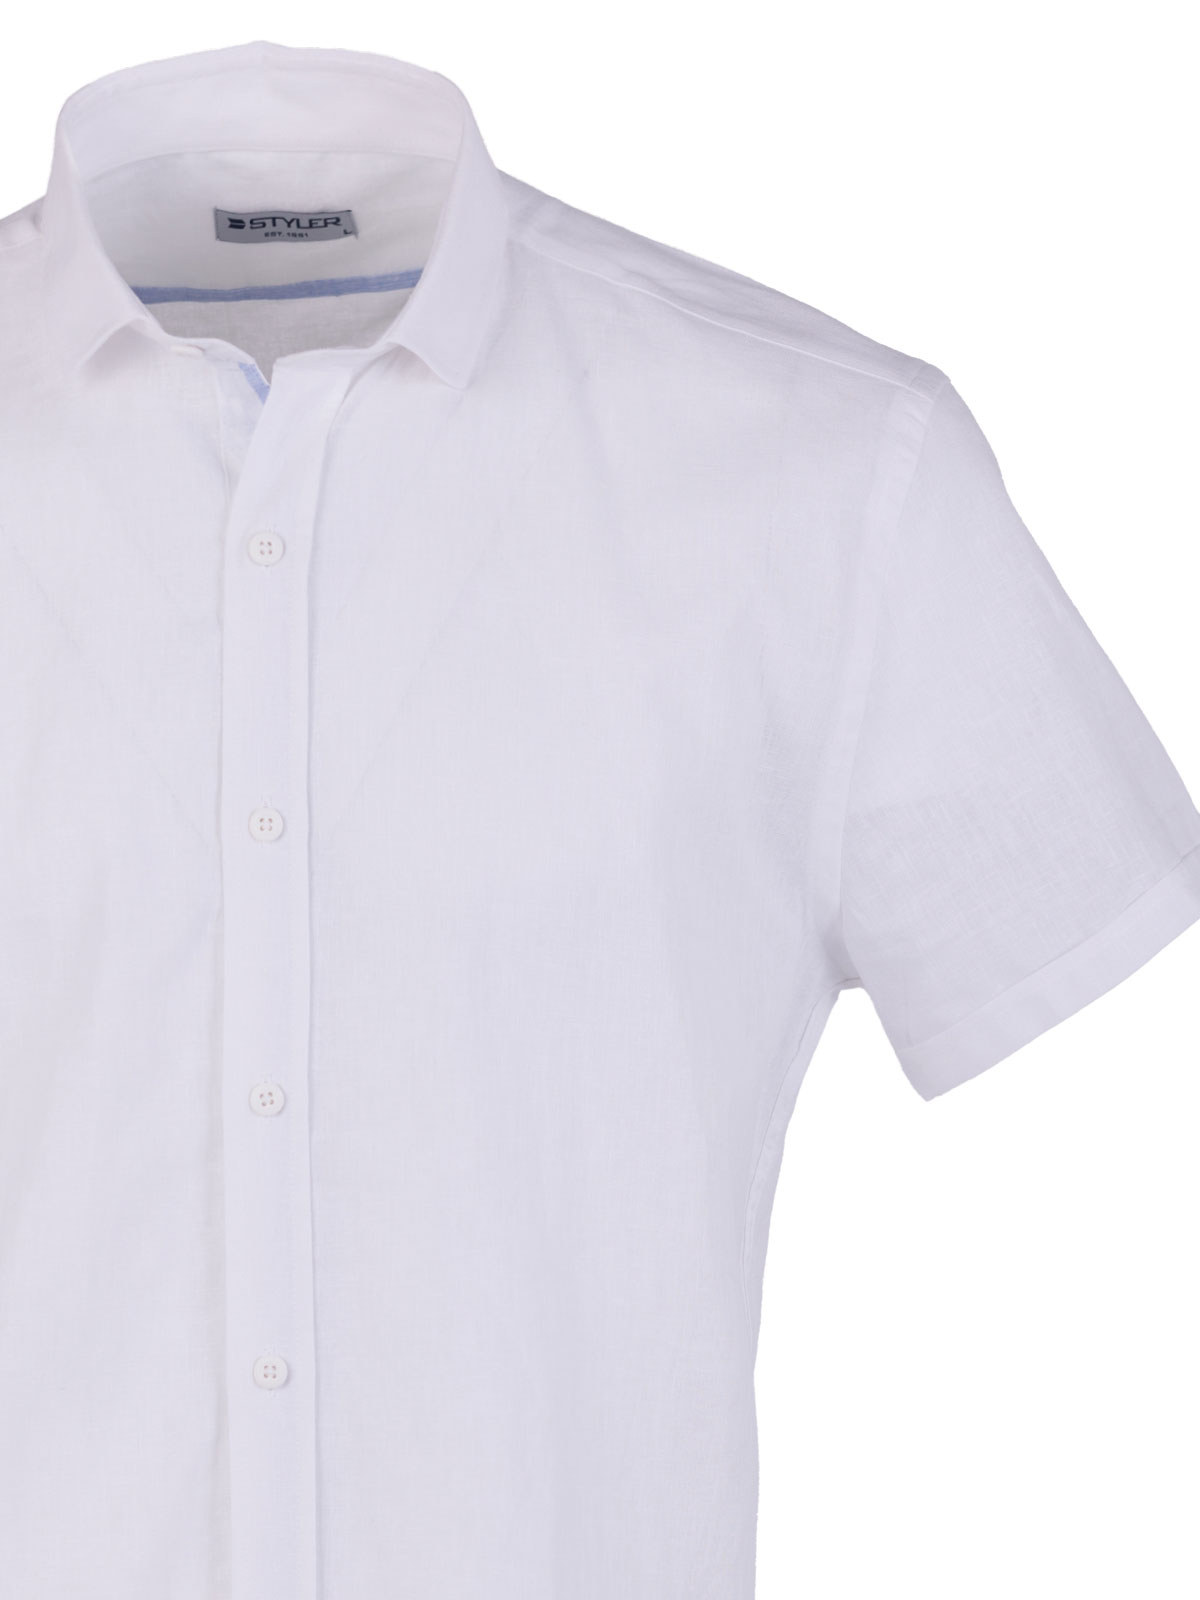 White linen and cotton shirt - 80227 € 43.87 img2